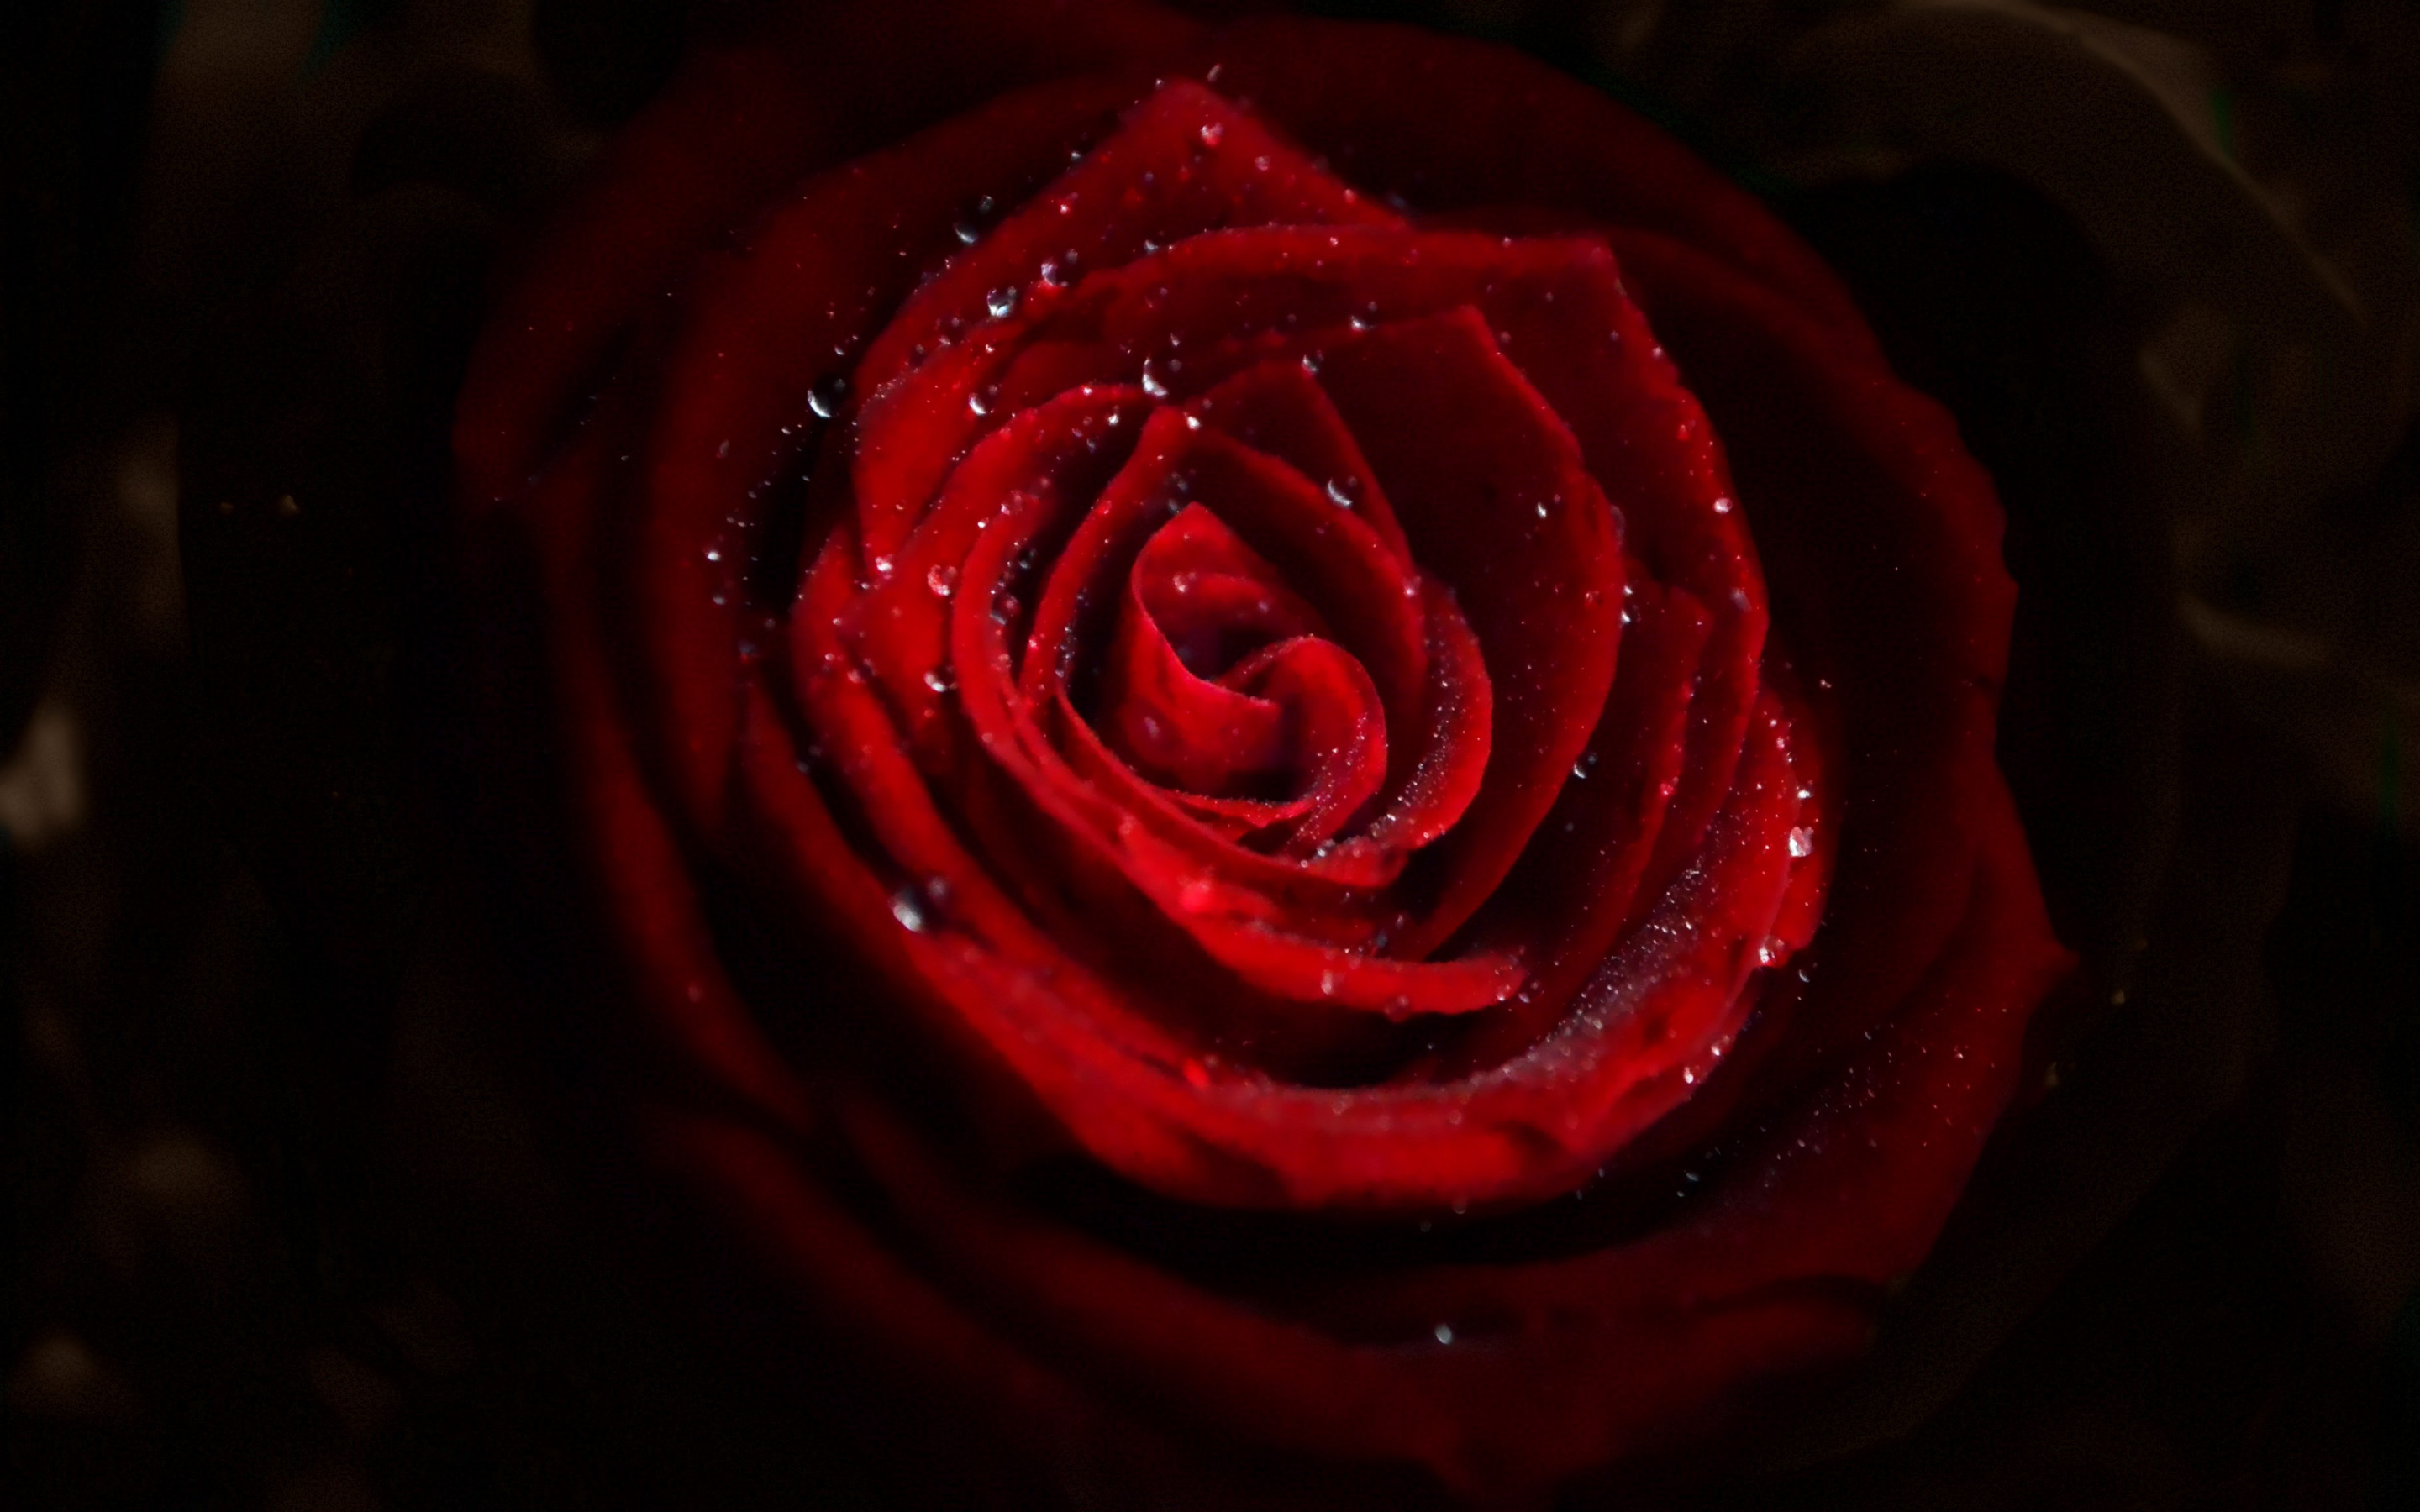 Water drops on red rose wallpaper 2880x1800